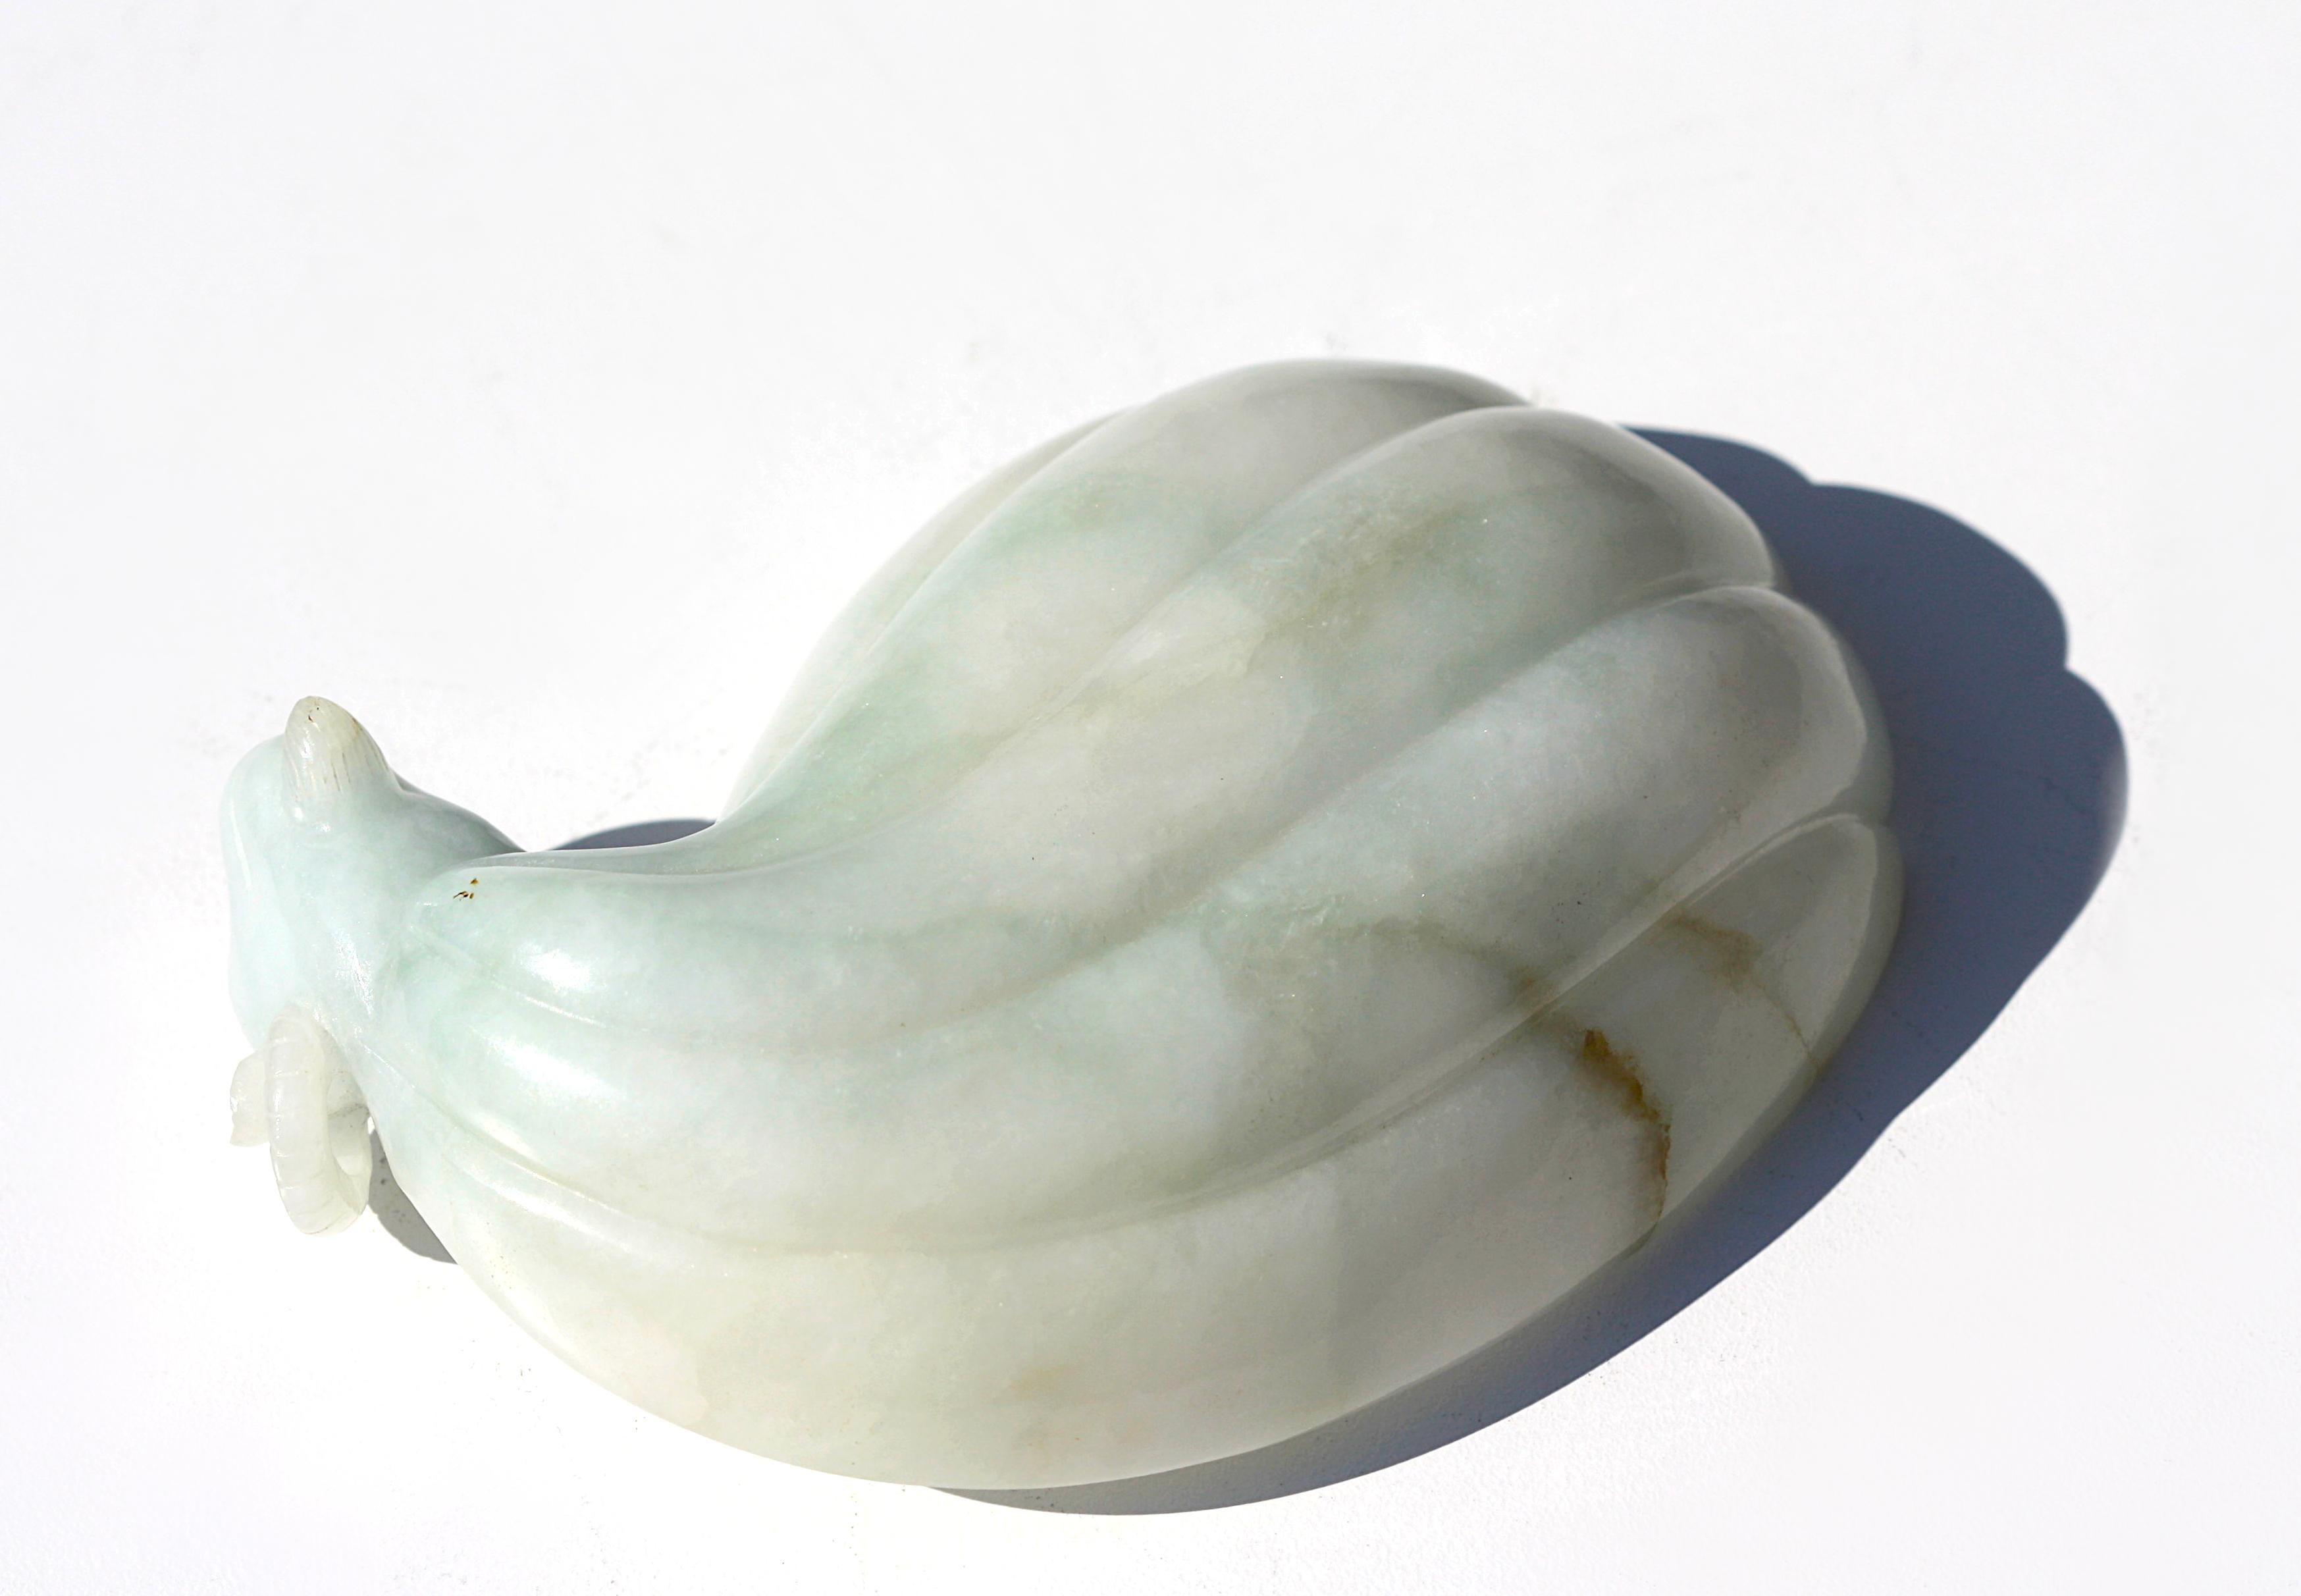 
Fine Chinese Ram Headed White Jadeite Brush Washer
The transparent white jadeite with hues of emerald green and lavender with slight veins of russet, the lobed oval coup terminating in a ram head, on a finely shaped and carved hardwood